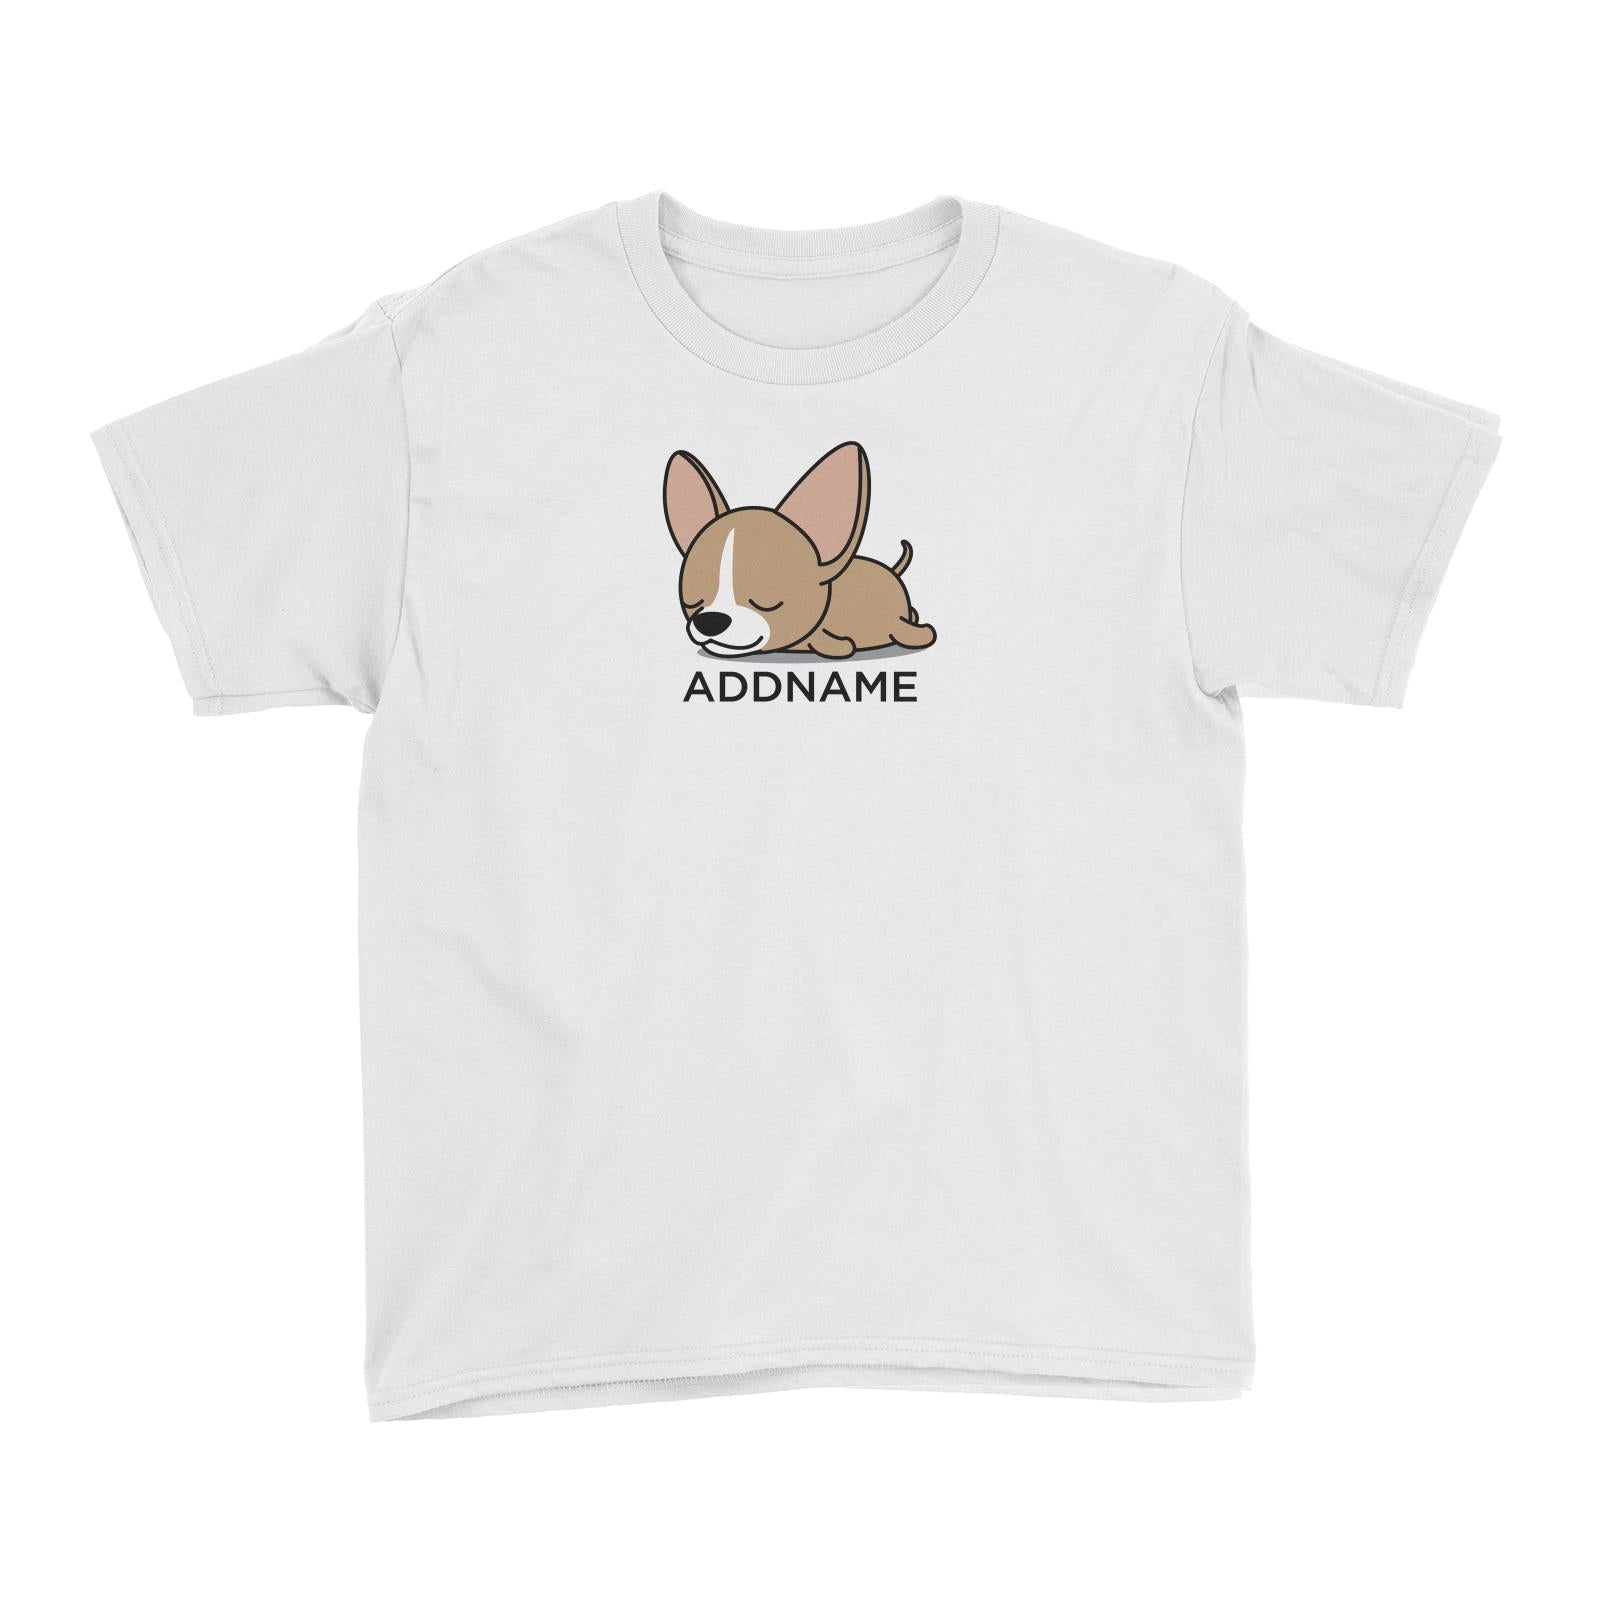 Lazy Chihuahua Dog Addname Kid's T-Shirt (FLASH DEAL)